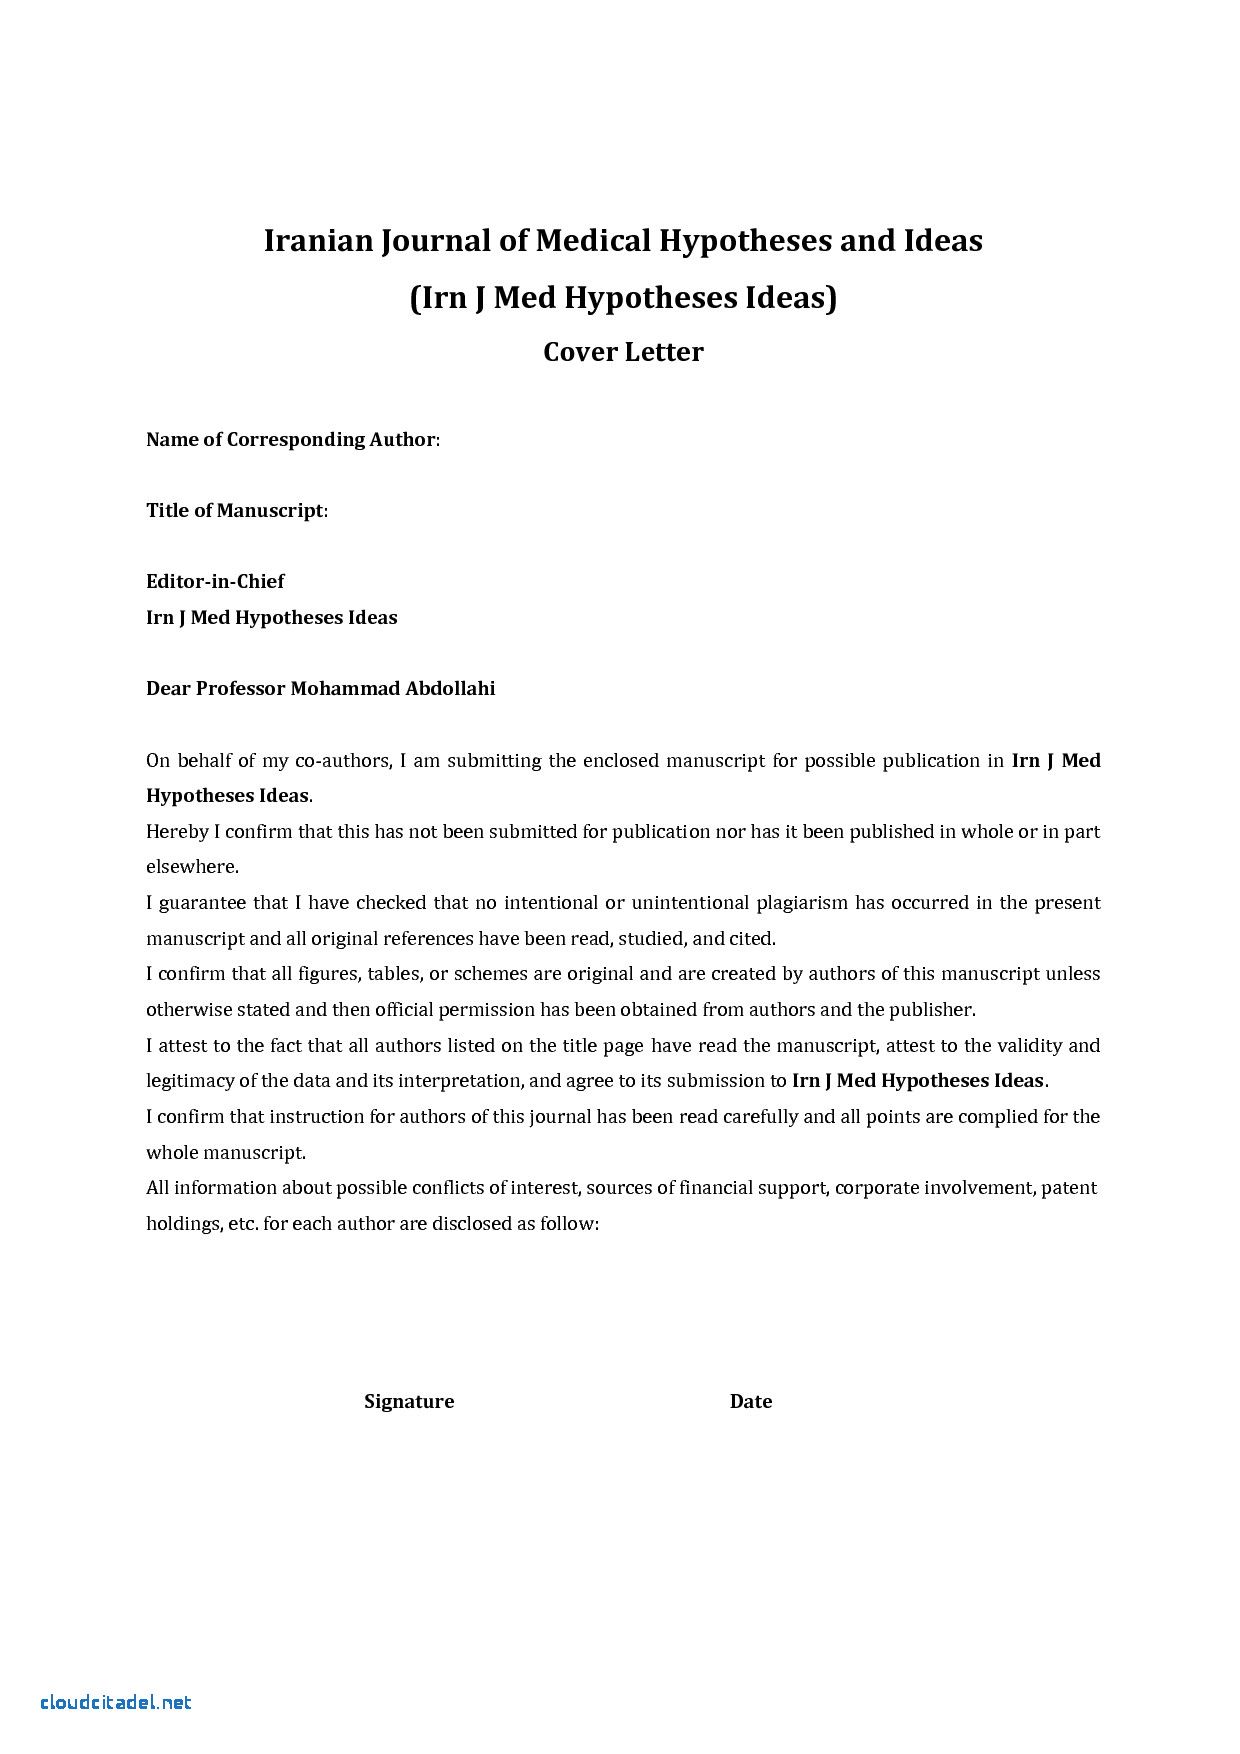 Detail Cover Letter Template Journal Submission Nomer 3